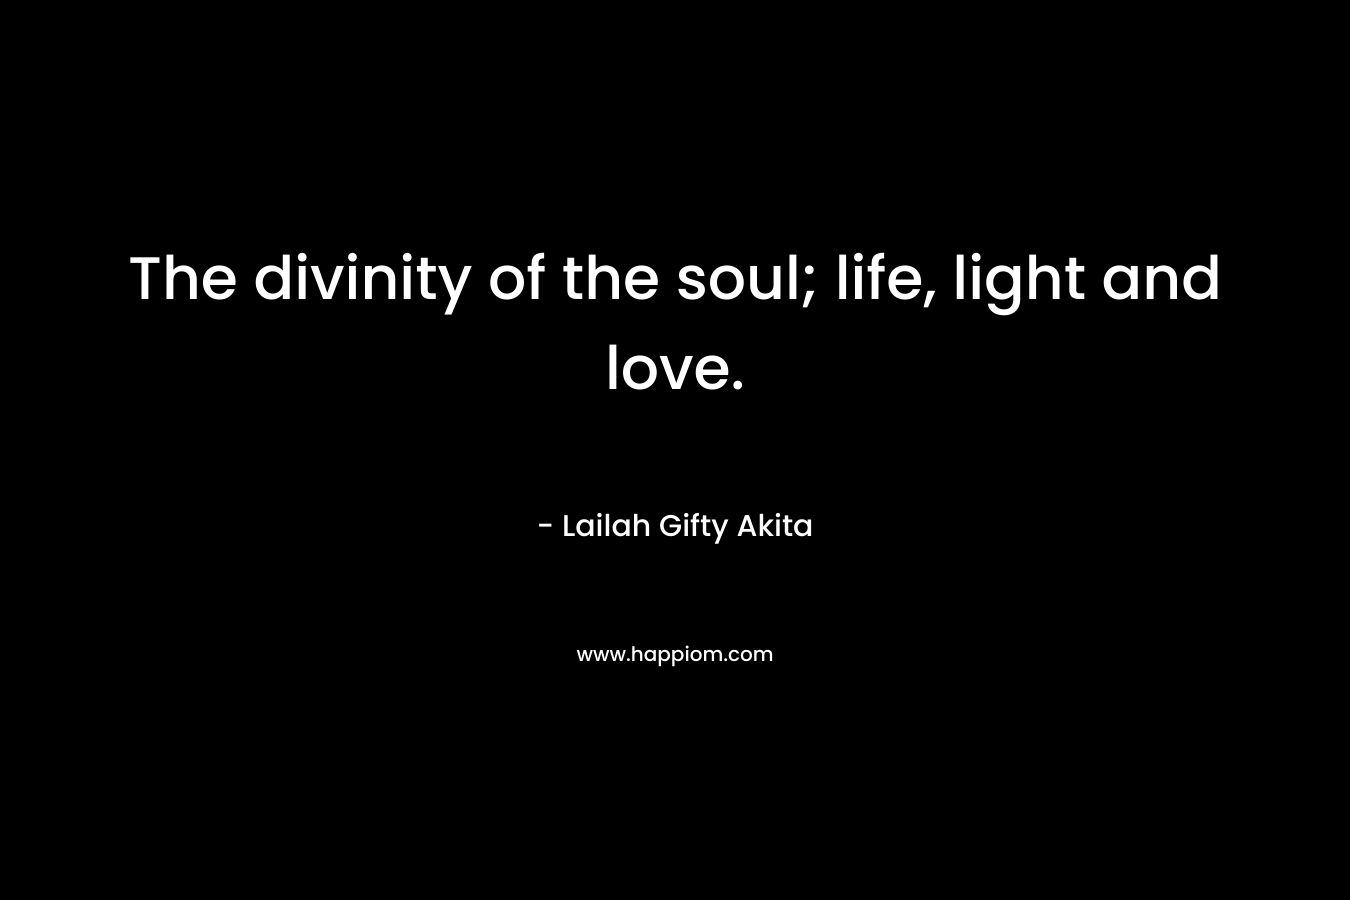 The divinity of the soul; life, light and love.